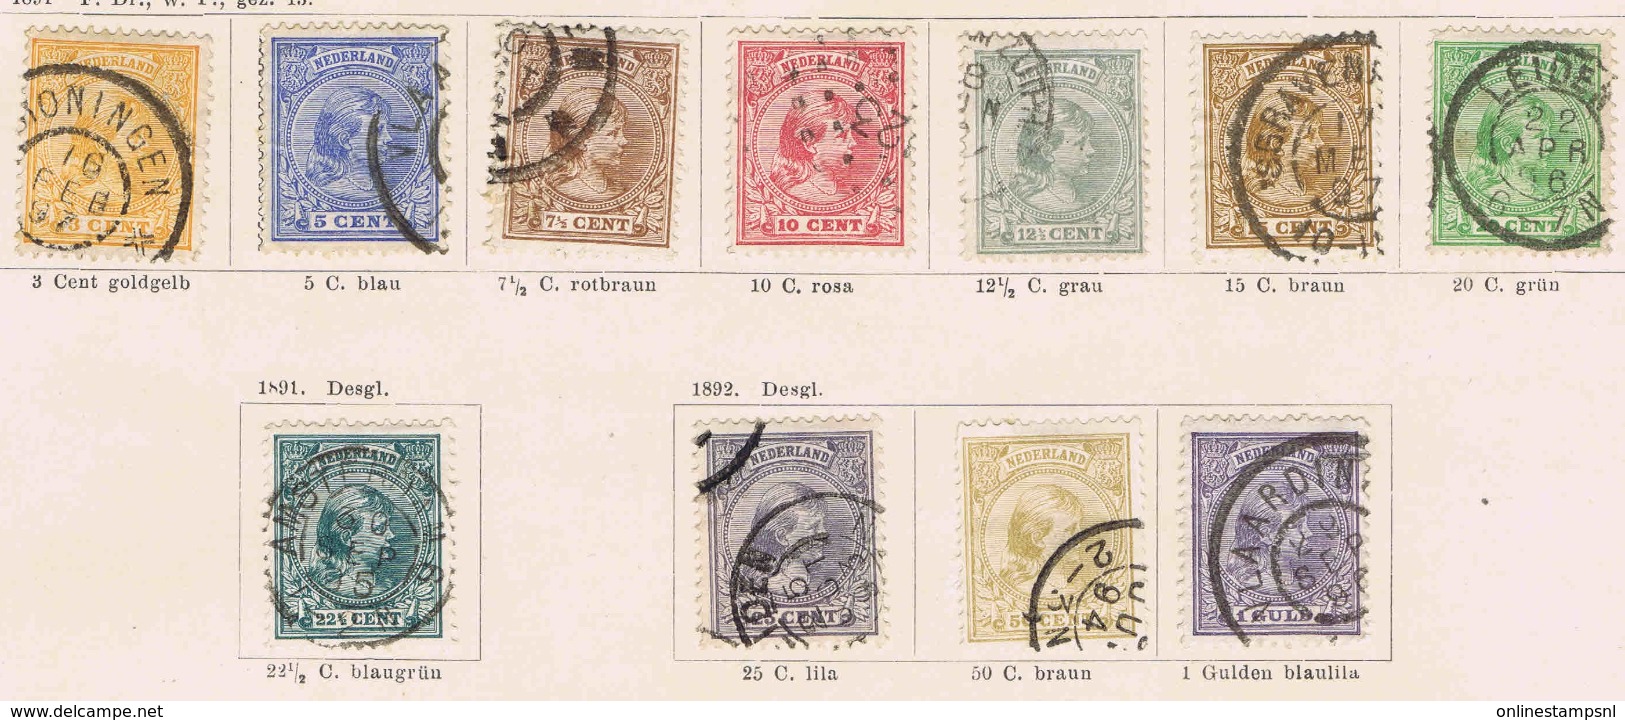 Netherlands: classic collection starts 1852 used on album pages Cat value NVPH 2017 approx. 2700 euro